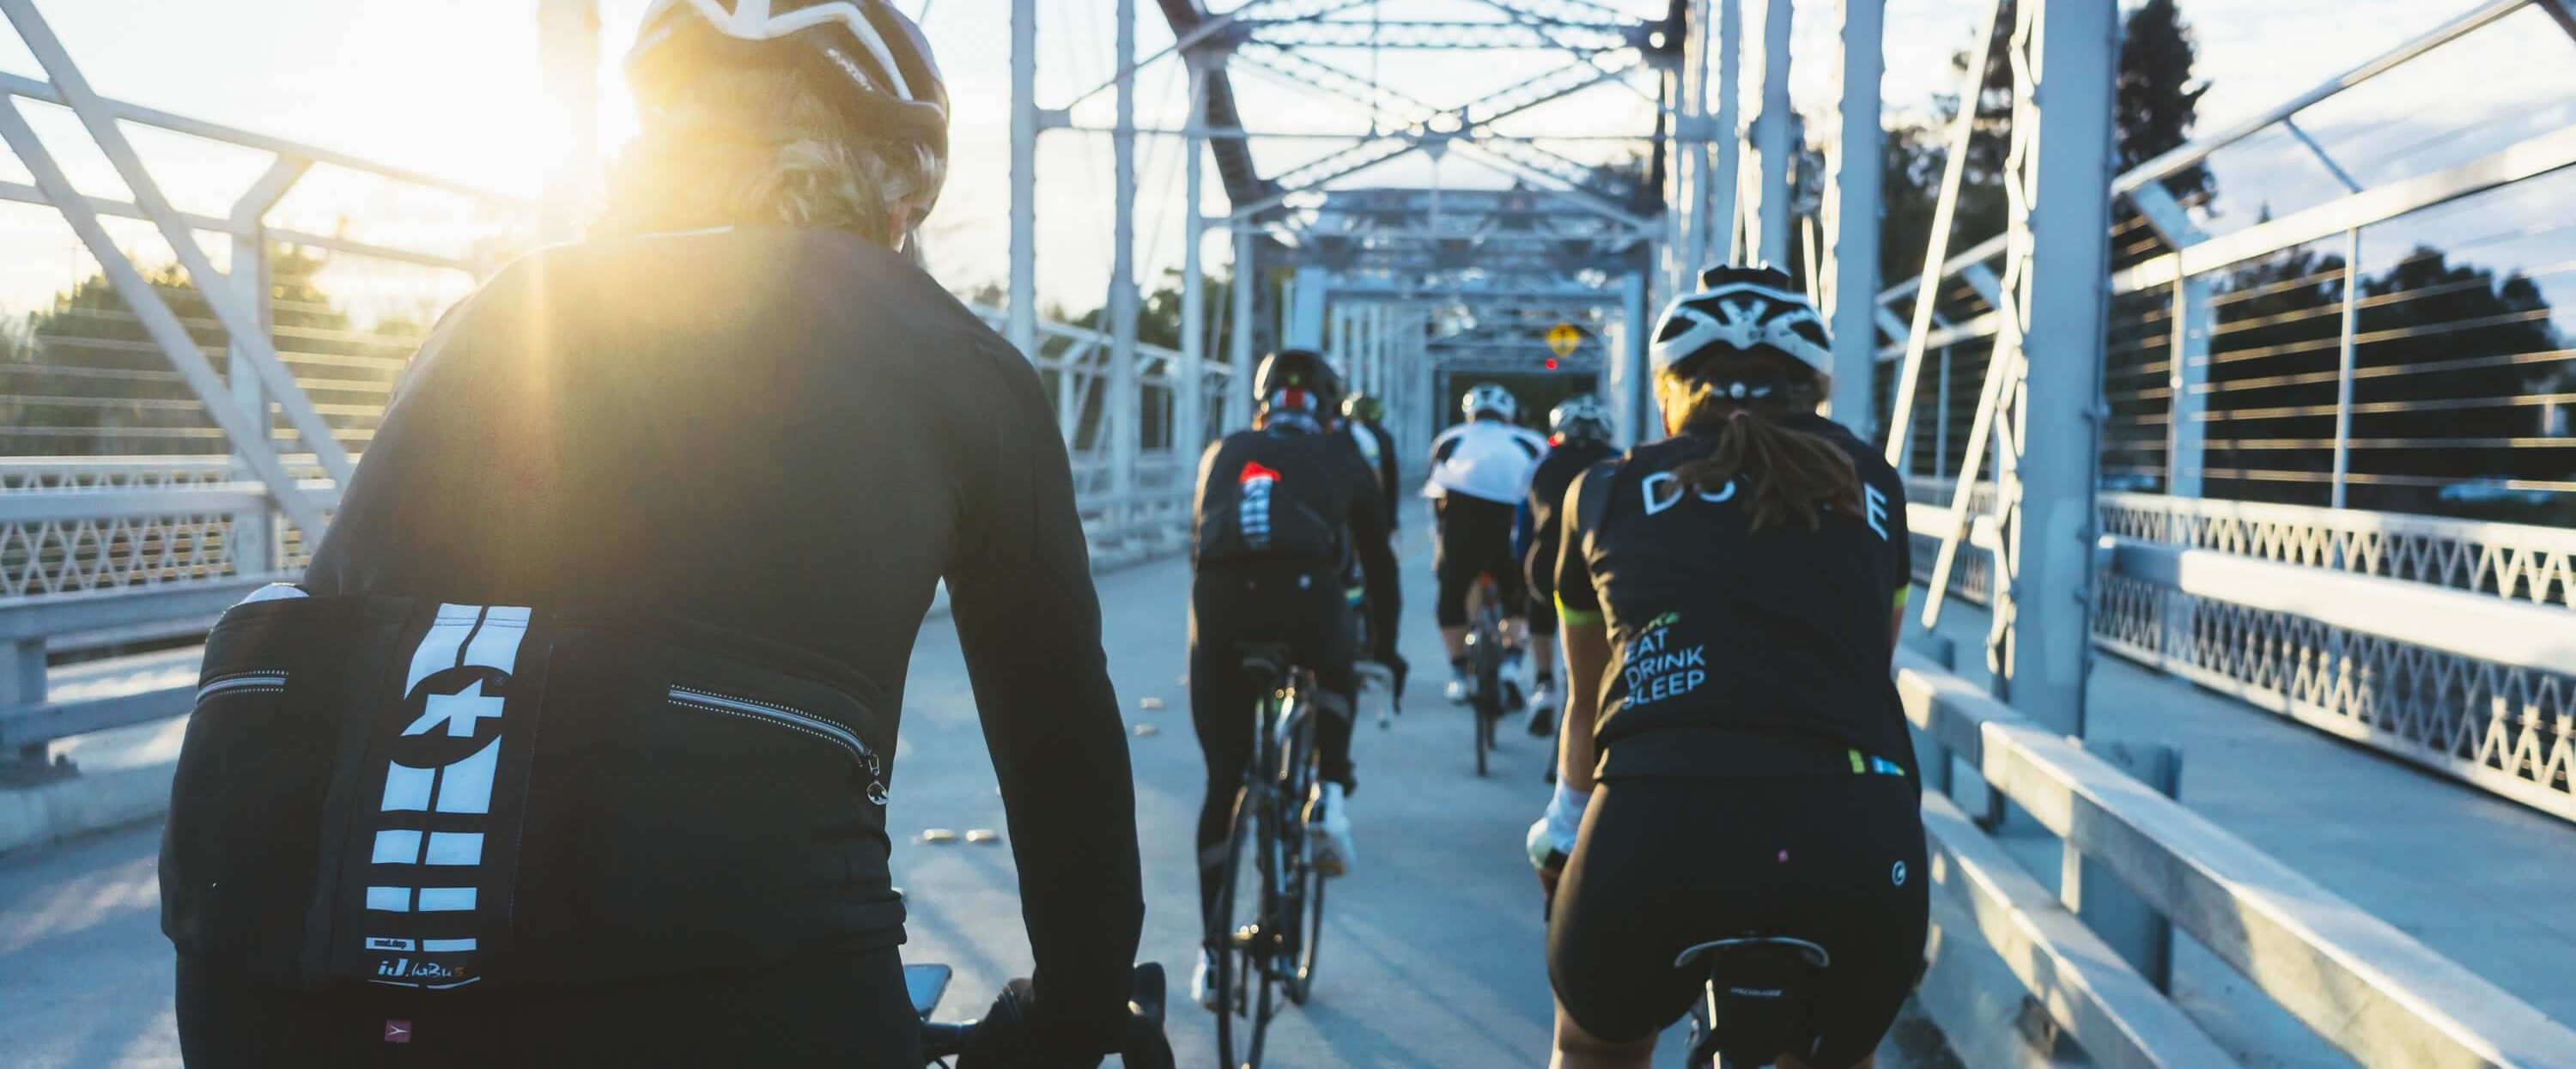 A group of bikers on a bridge early in the morning